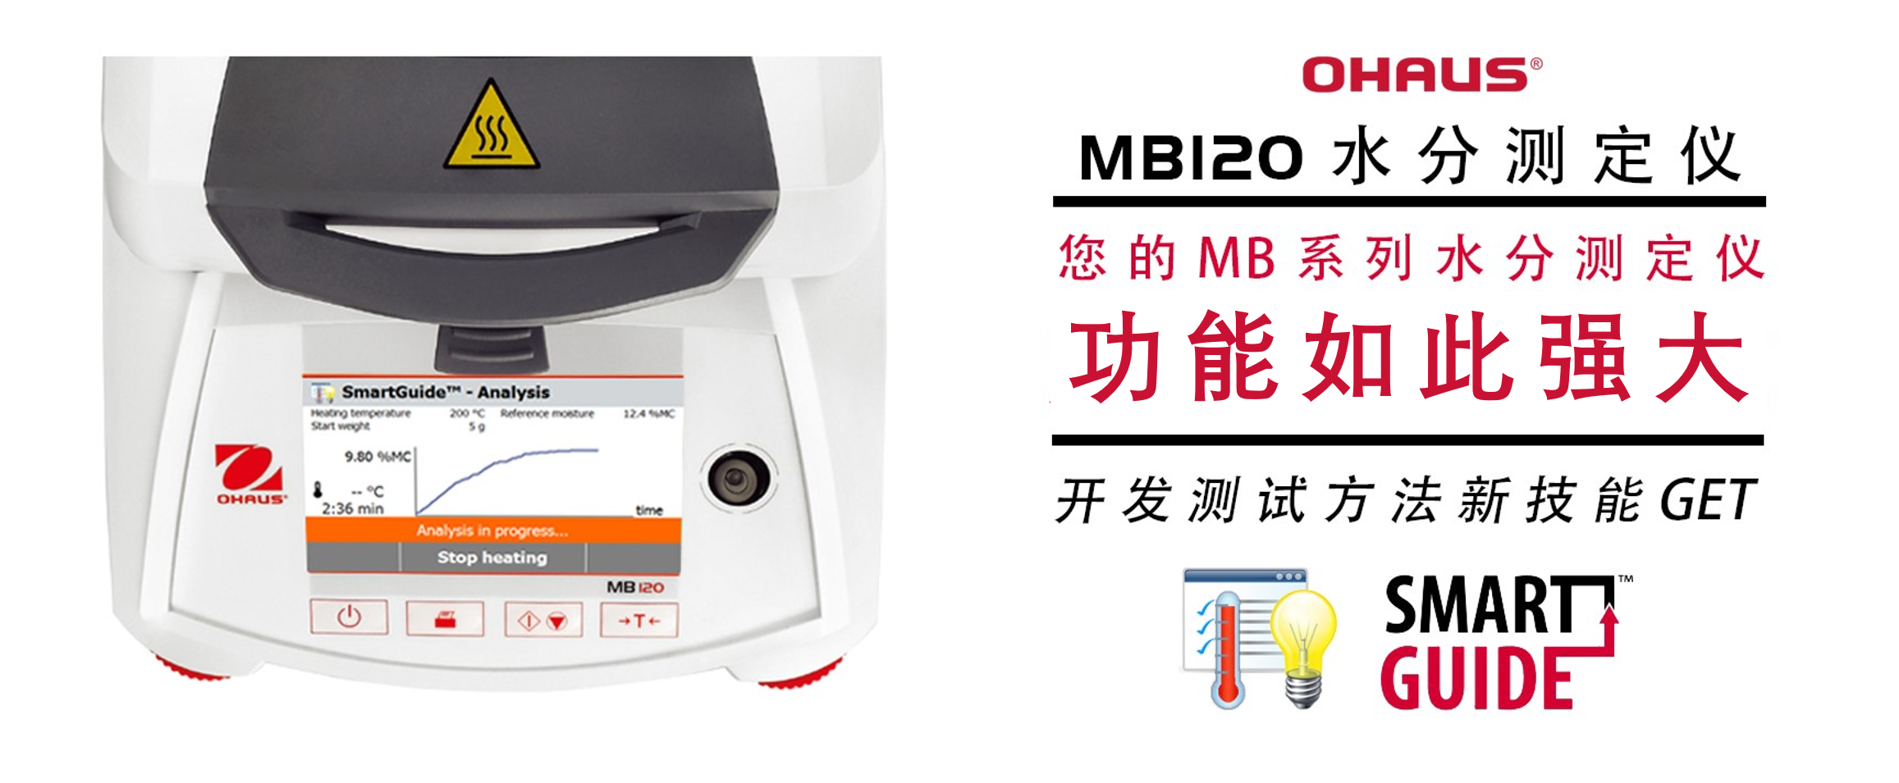 MB120-smart-guide宣传Banner.png